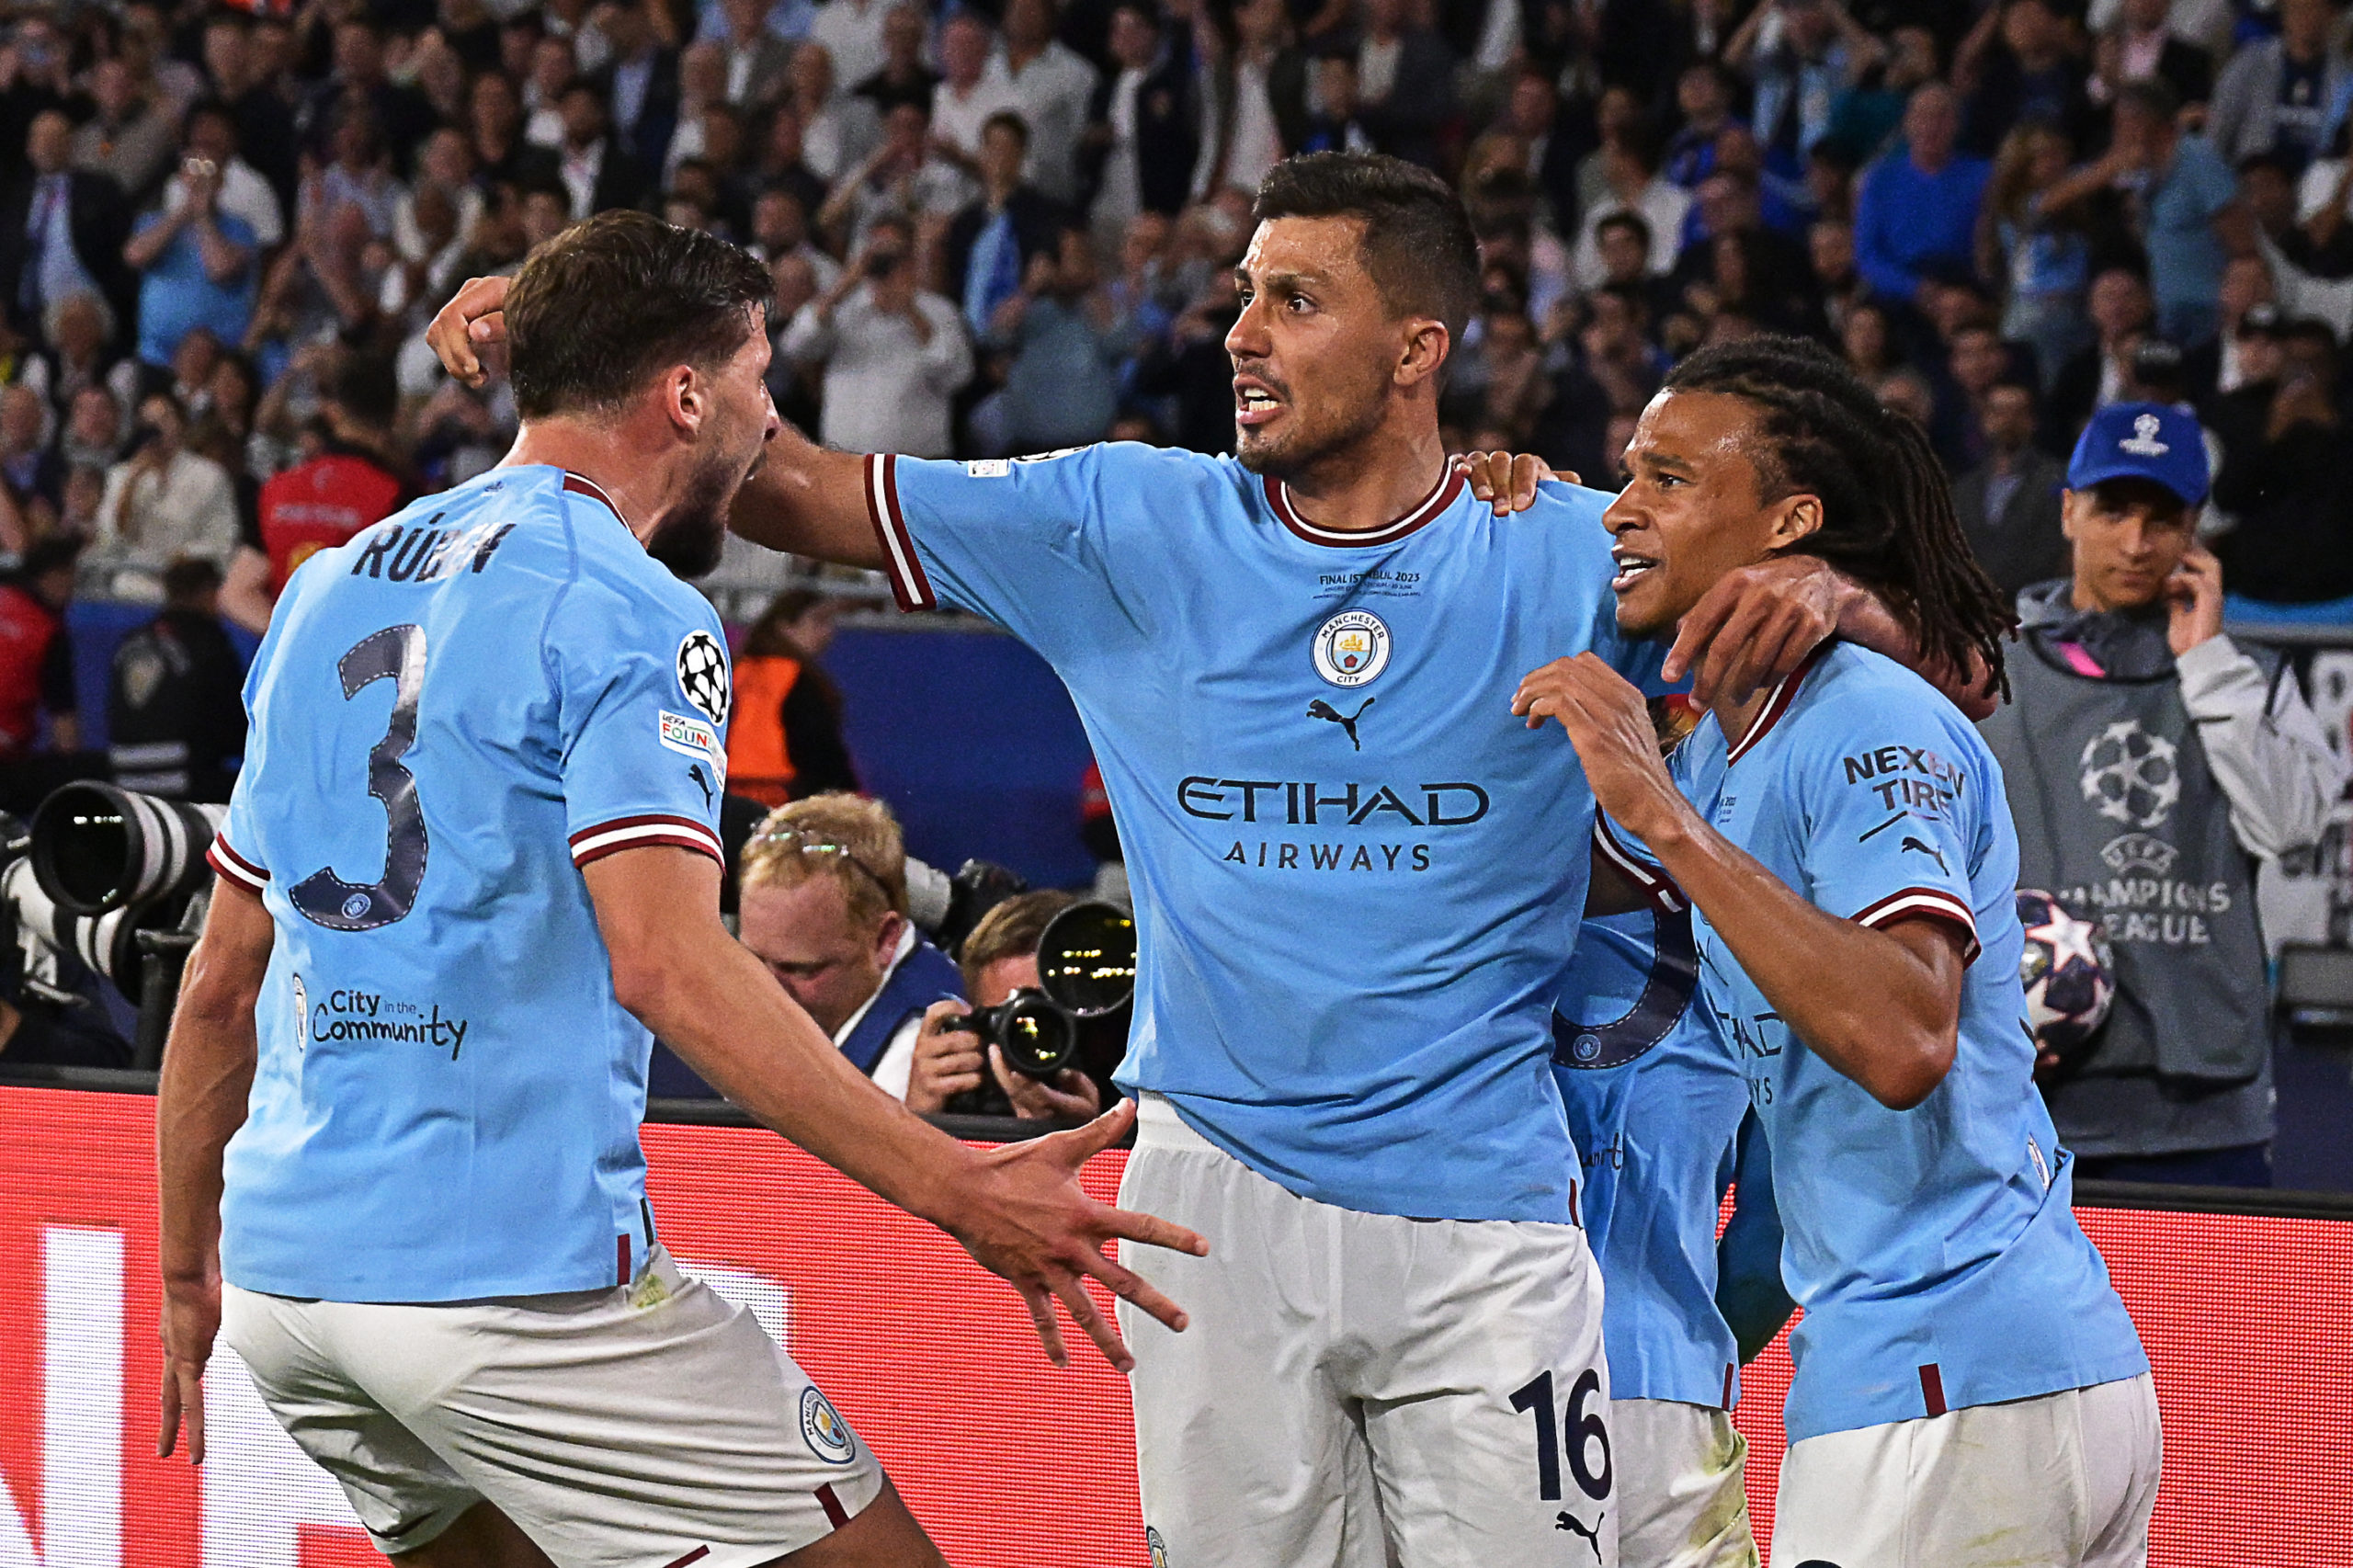 Champions League Final: Manchester City Wins First Champions